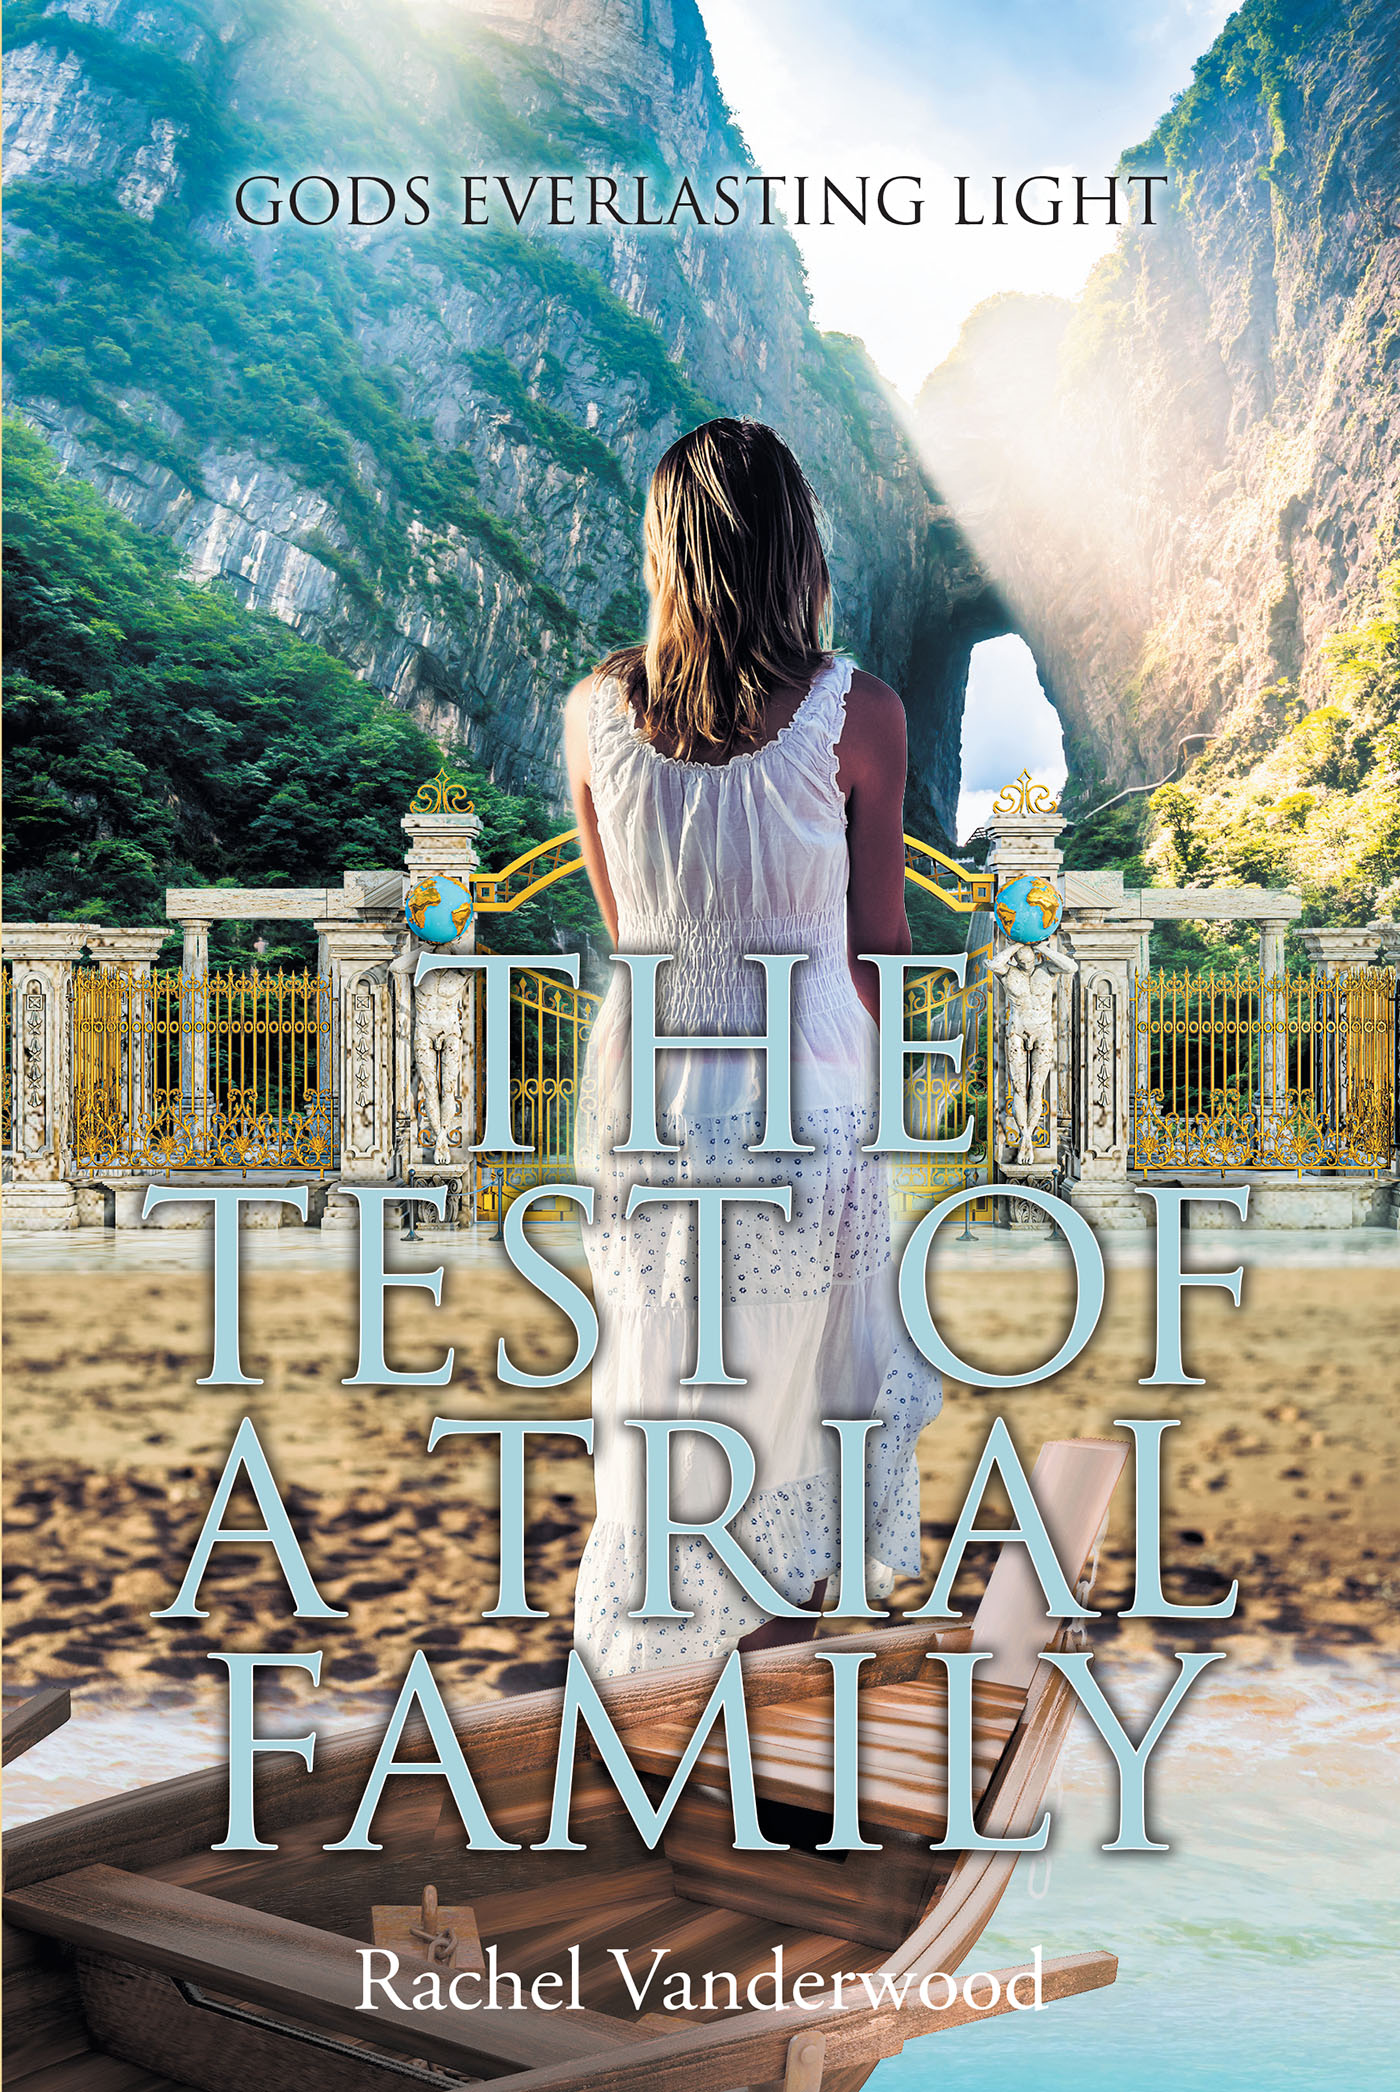 Rachel Vanderwood’s Newly Released "The Test of a Trial Family" is a Compelling Story of Unexpected Connections and Twists of Fate